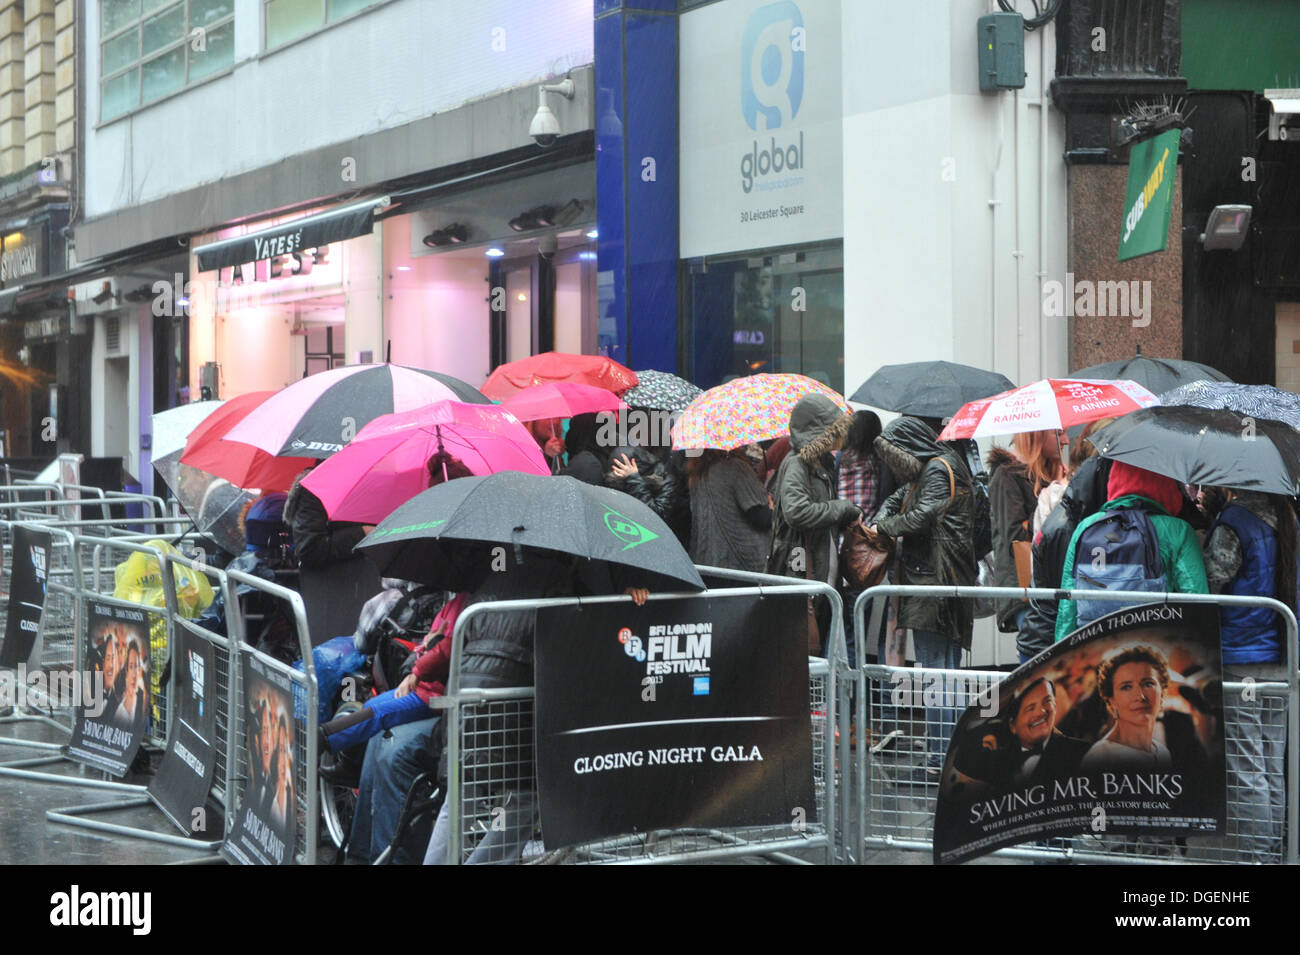 Leicester Square, London, UK. 20th October 2013. Film fans brave torrential rain in Leicester Square as they wait for tonight's closing gala of the British Film Festival, with the screening of Saving Mr Banks, starring Tom Hanks and Emma Thompson. Credit:  Matthew Chattle/Alamy Live News Stock Photo